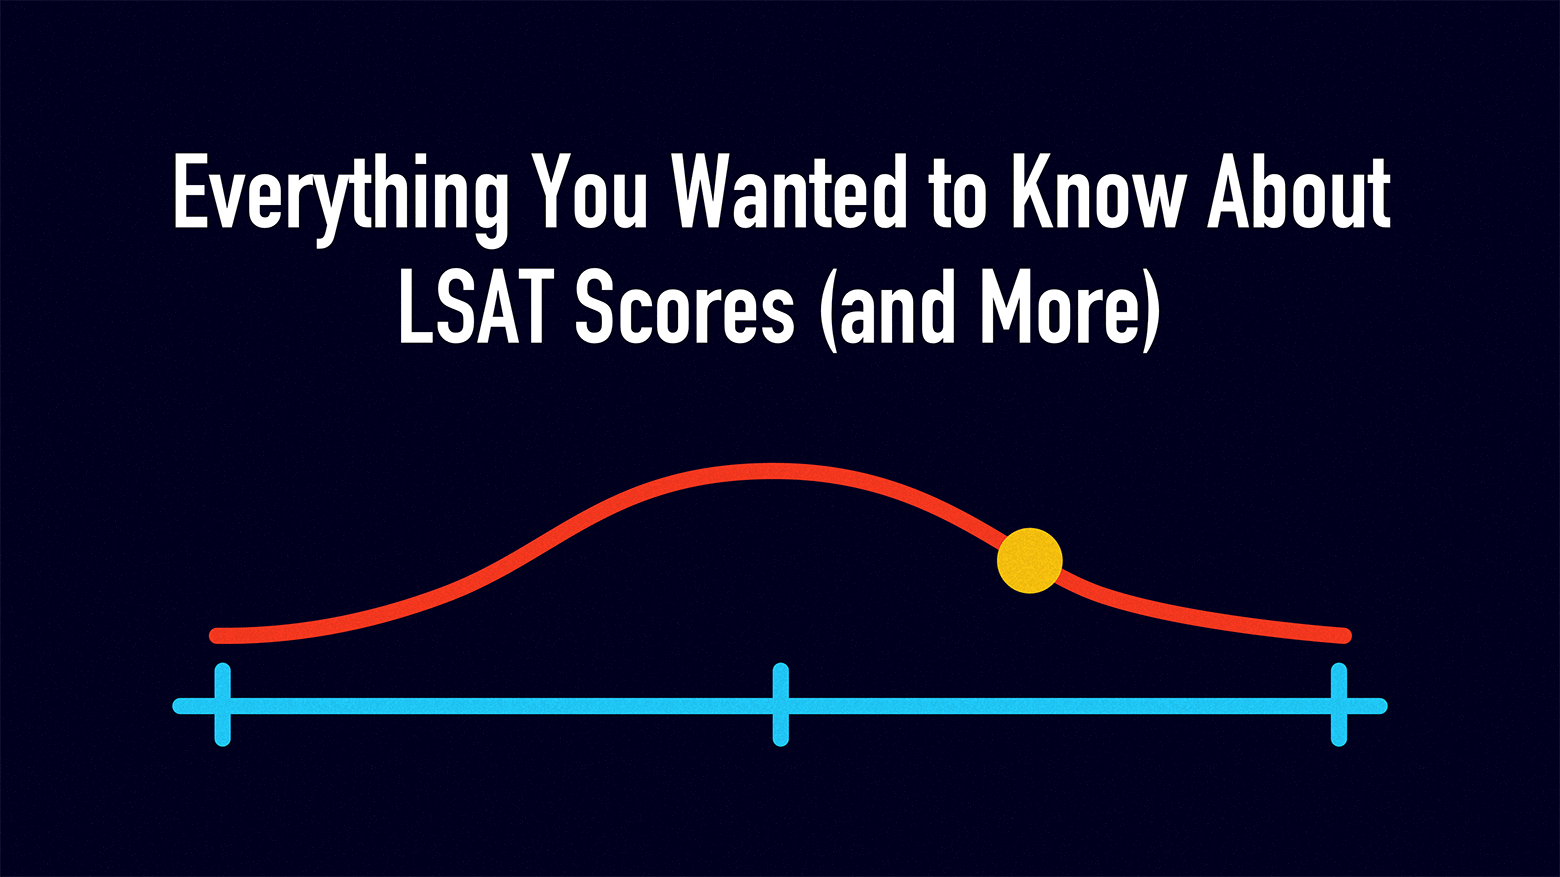 Everything you wanted to know about LSAT scores (and more)